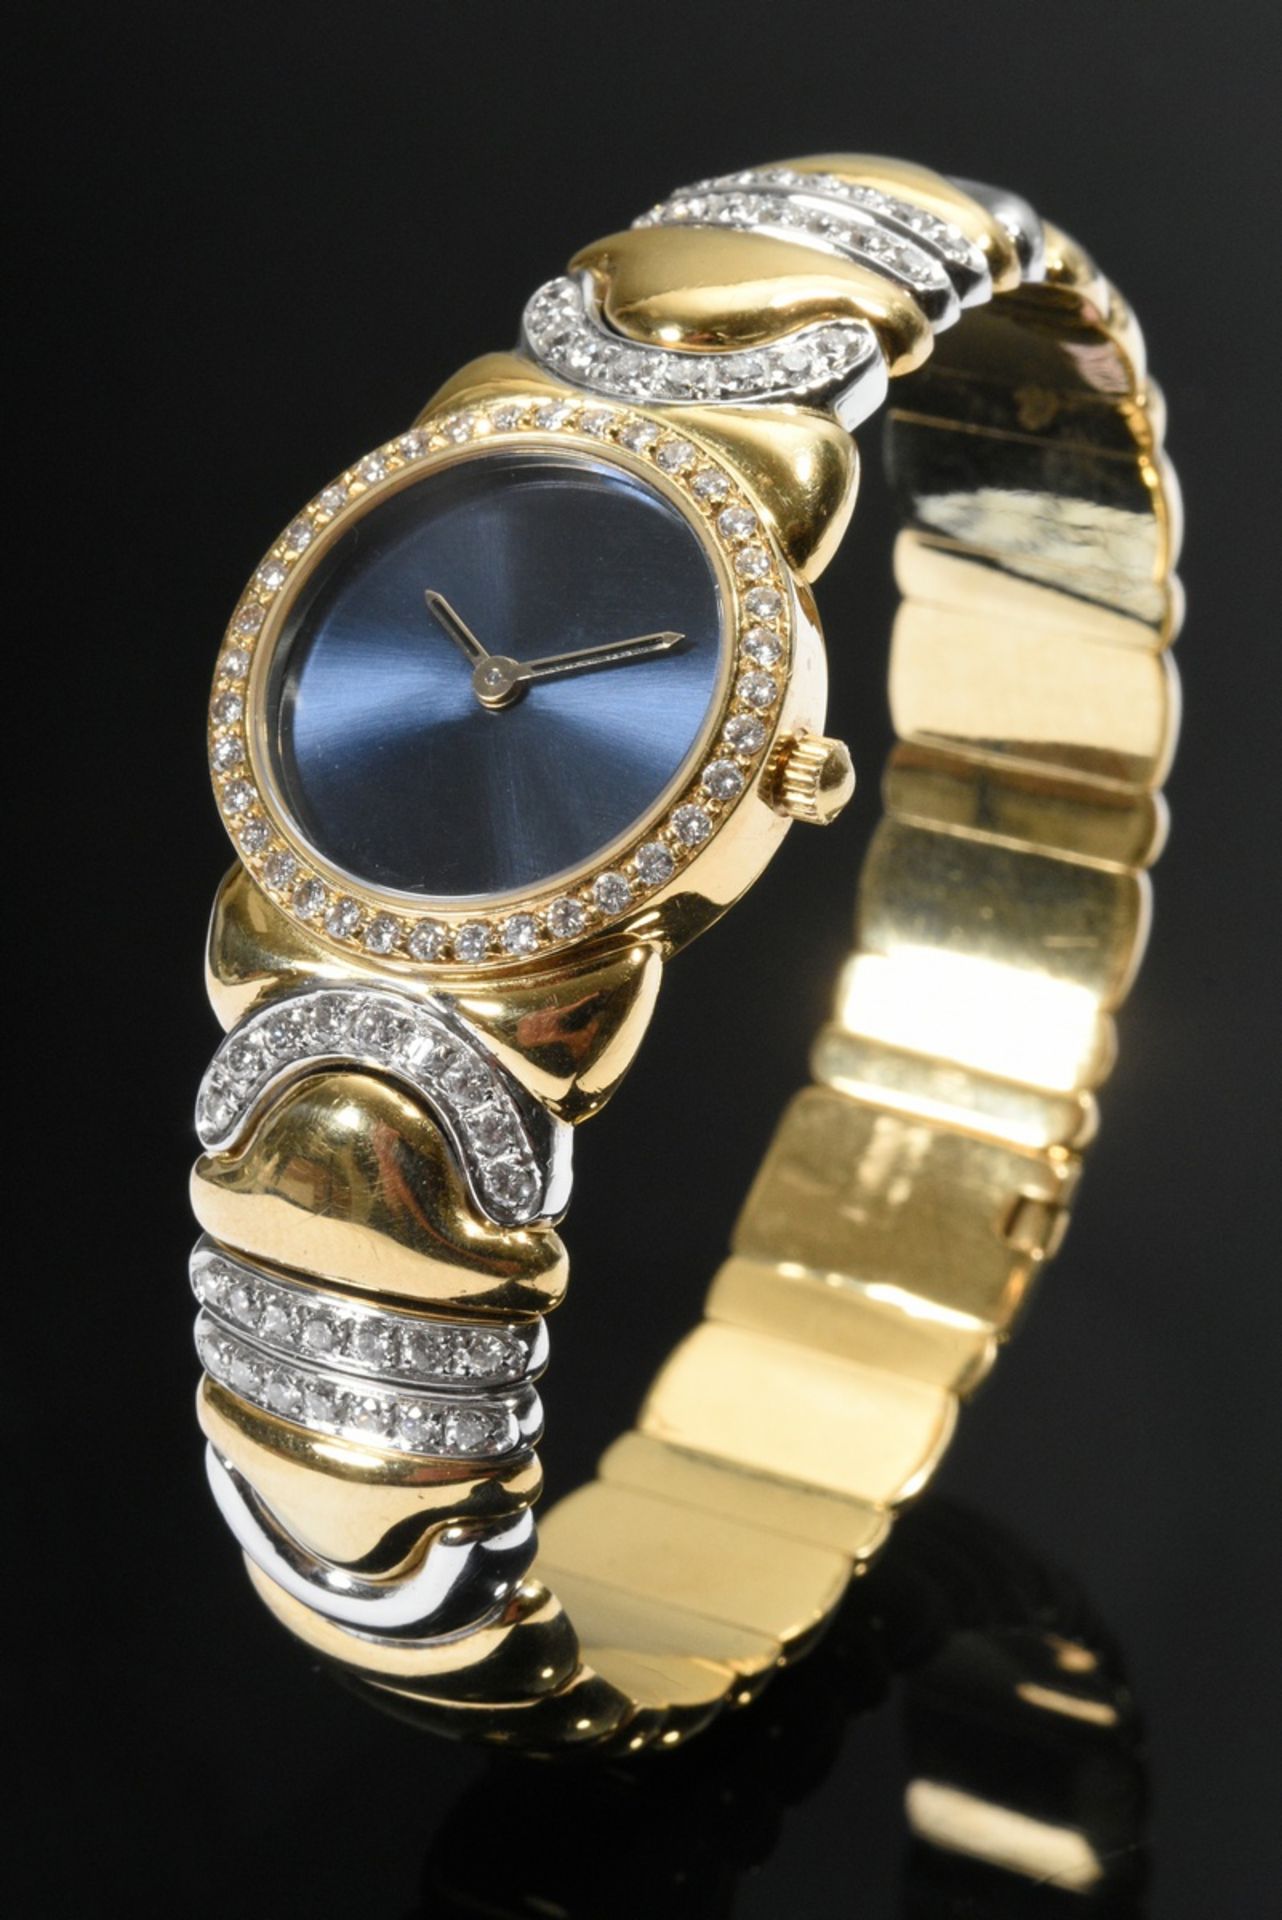 Italian yellow and white gold 750 jewellery watch with brilliant-cut diamonds (total approx. 1.80ct